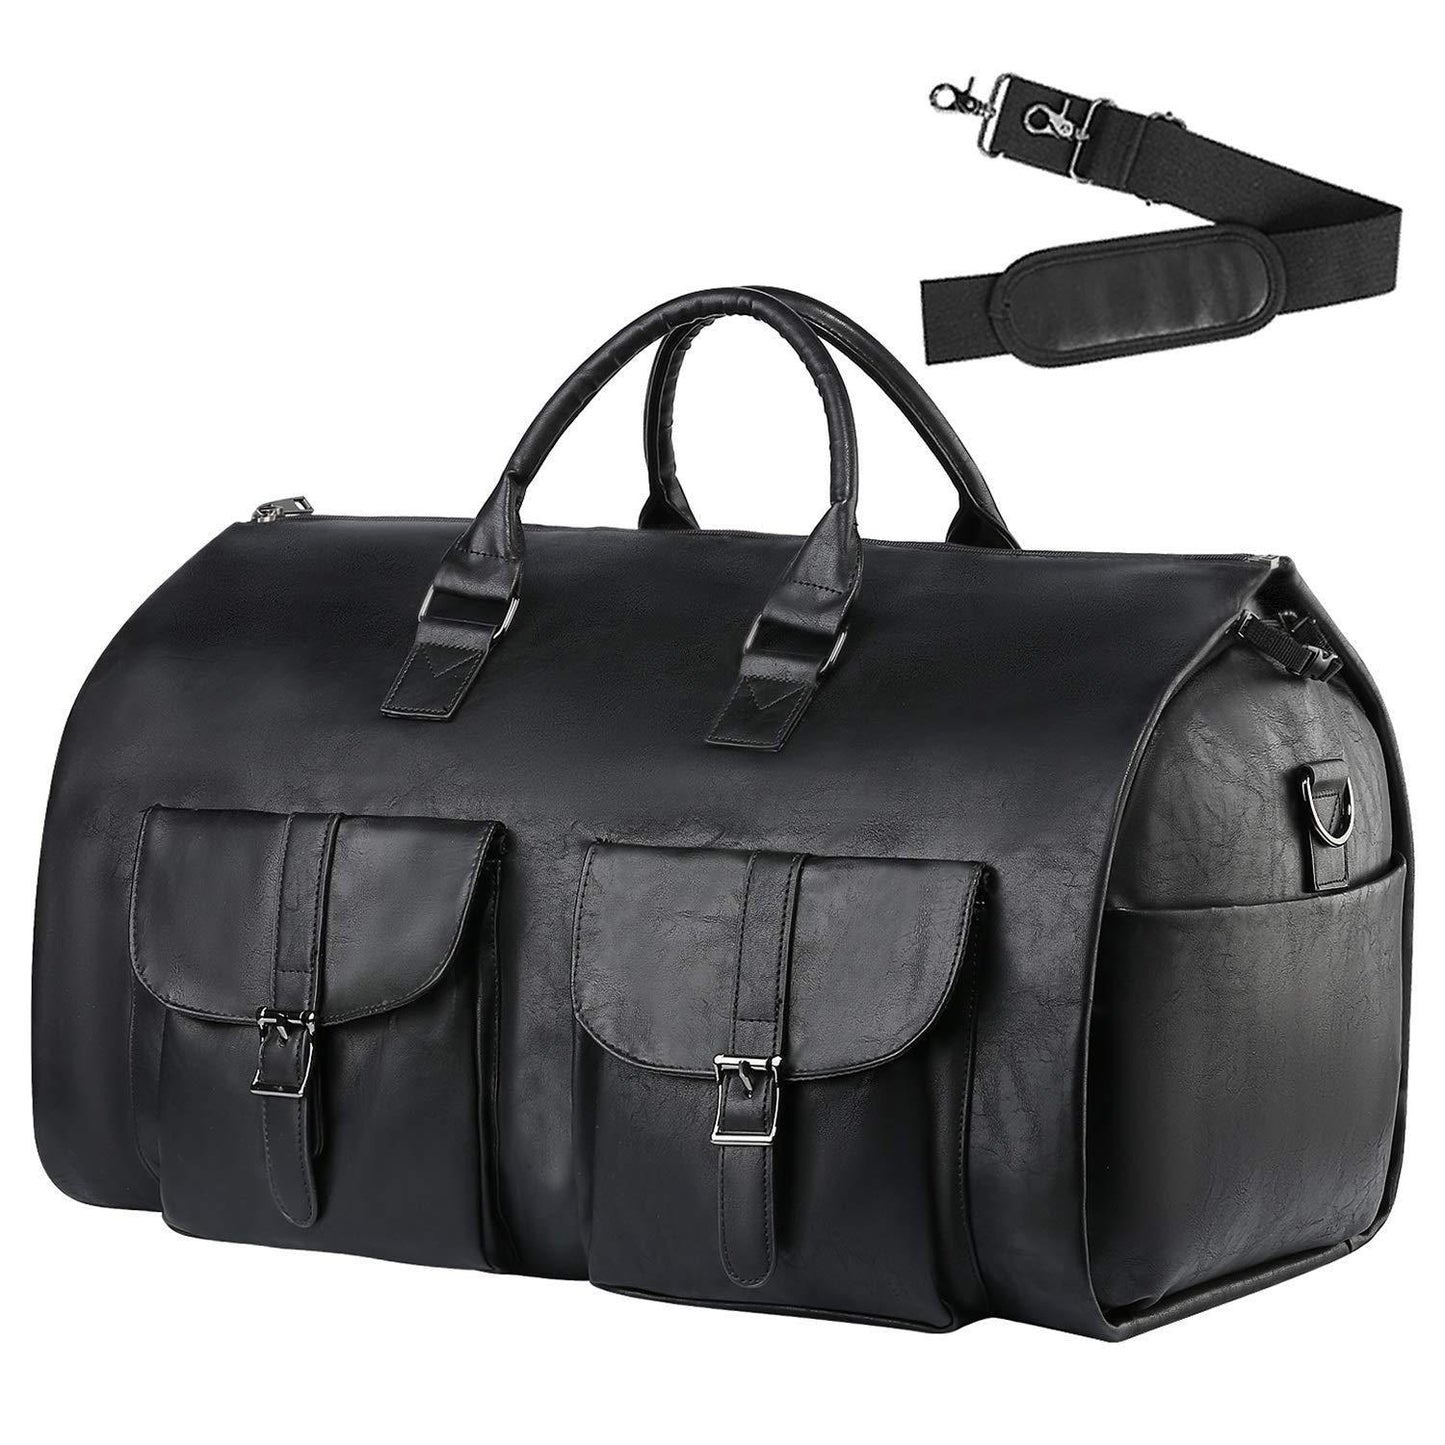 Convertible Duffle Garment Bag Promotion-with-start10 - Leather - Black - hideabTest - CozyBuys